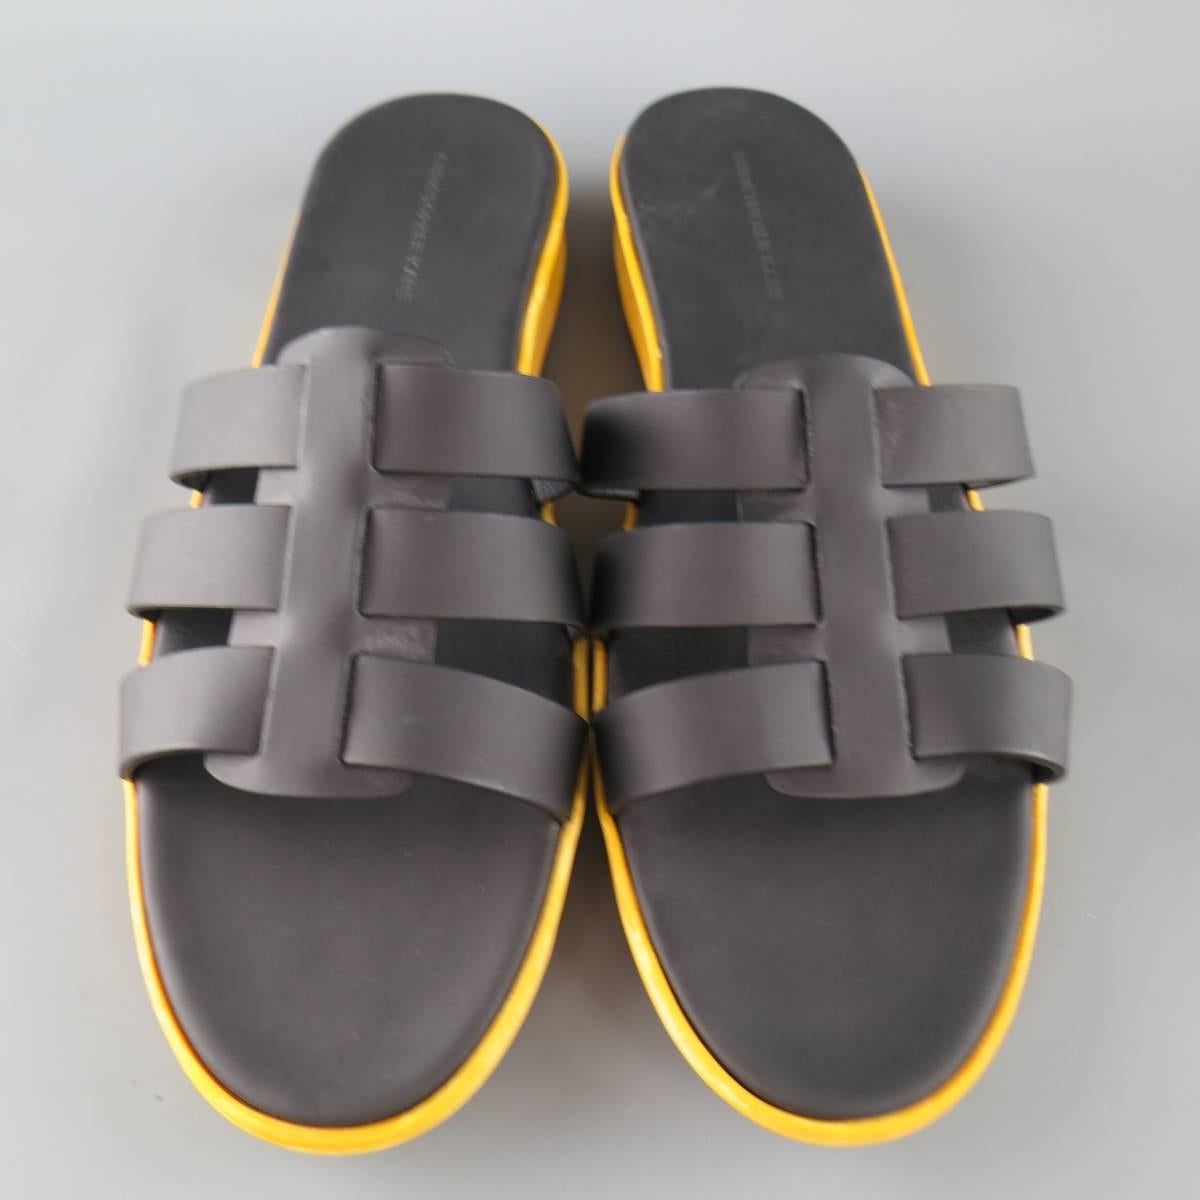 CHRISTOPHER KANE sandals feature black rubberized leather straps and a thick textured yellow rubber sole. Made in Italy.
 
Excellent Pre-Owned Condition.
Marked: (no Size)
 
Outsole: 11.75 x 3.95 in.


Web ID: 82288 
